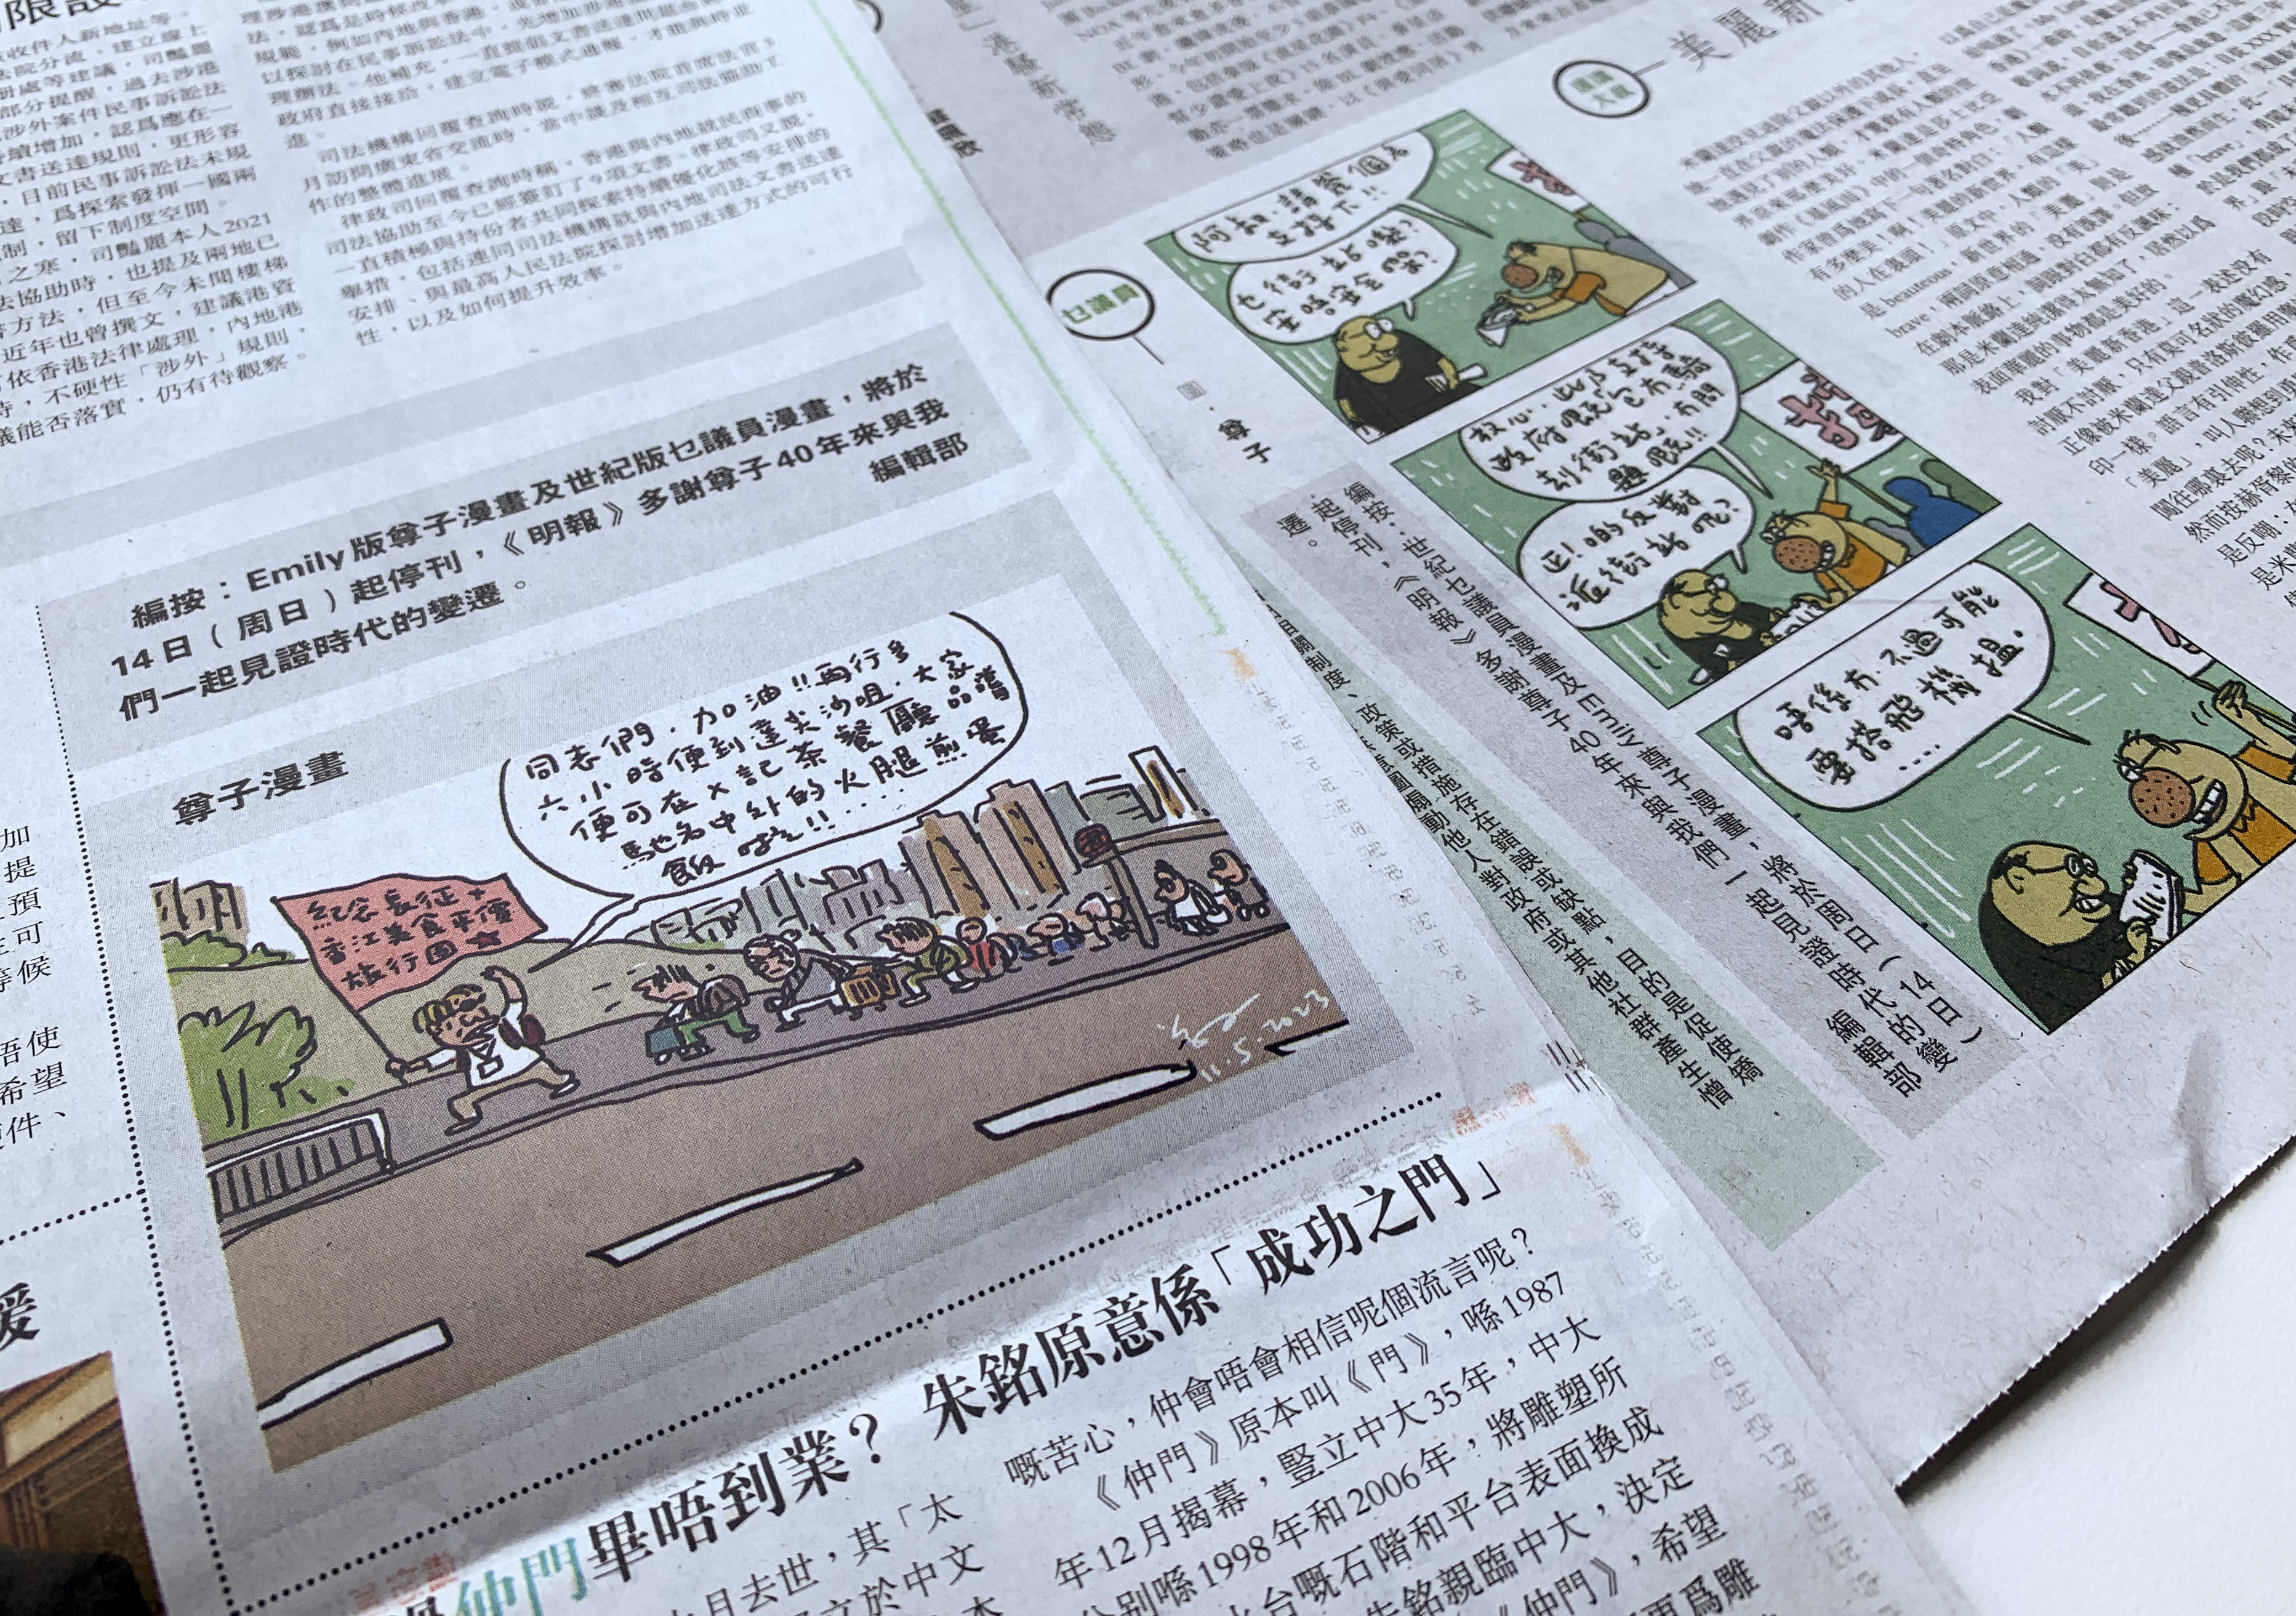 Chinese-language newspaper Ming Pao announced last week that veteran cartoonist Zunzi’s contributions would end after 40 years. His cartoons caused controversy and have been pulled. Ming Pao has not explained its decision. Photo: SCMP